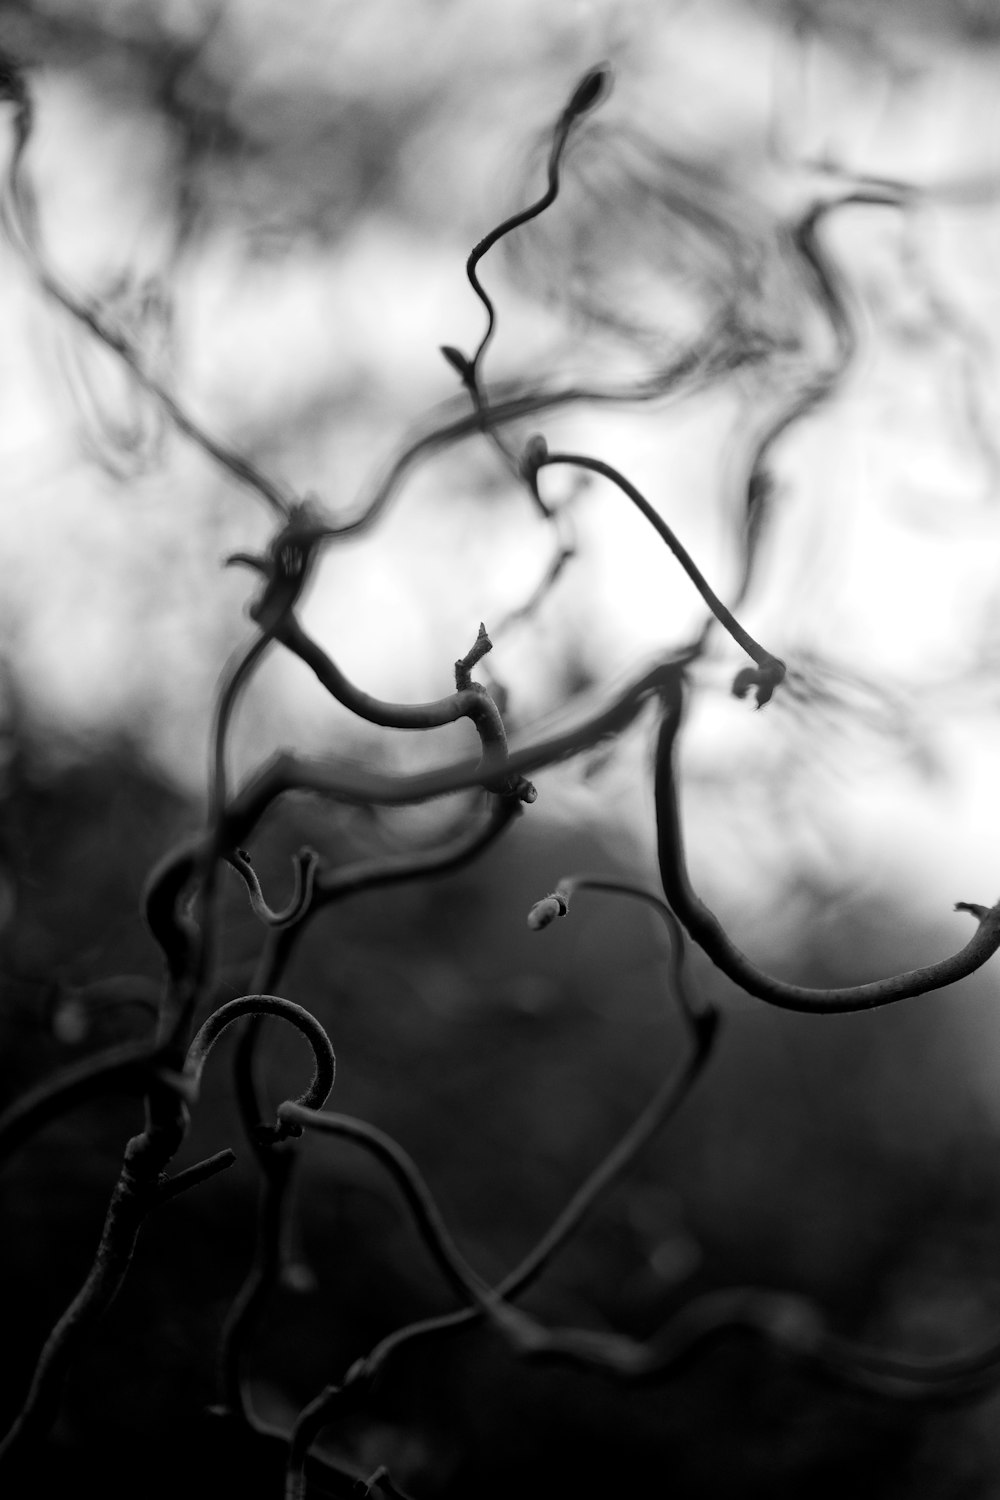 grayscale photo of a wire